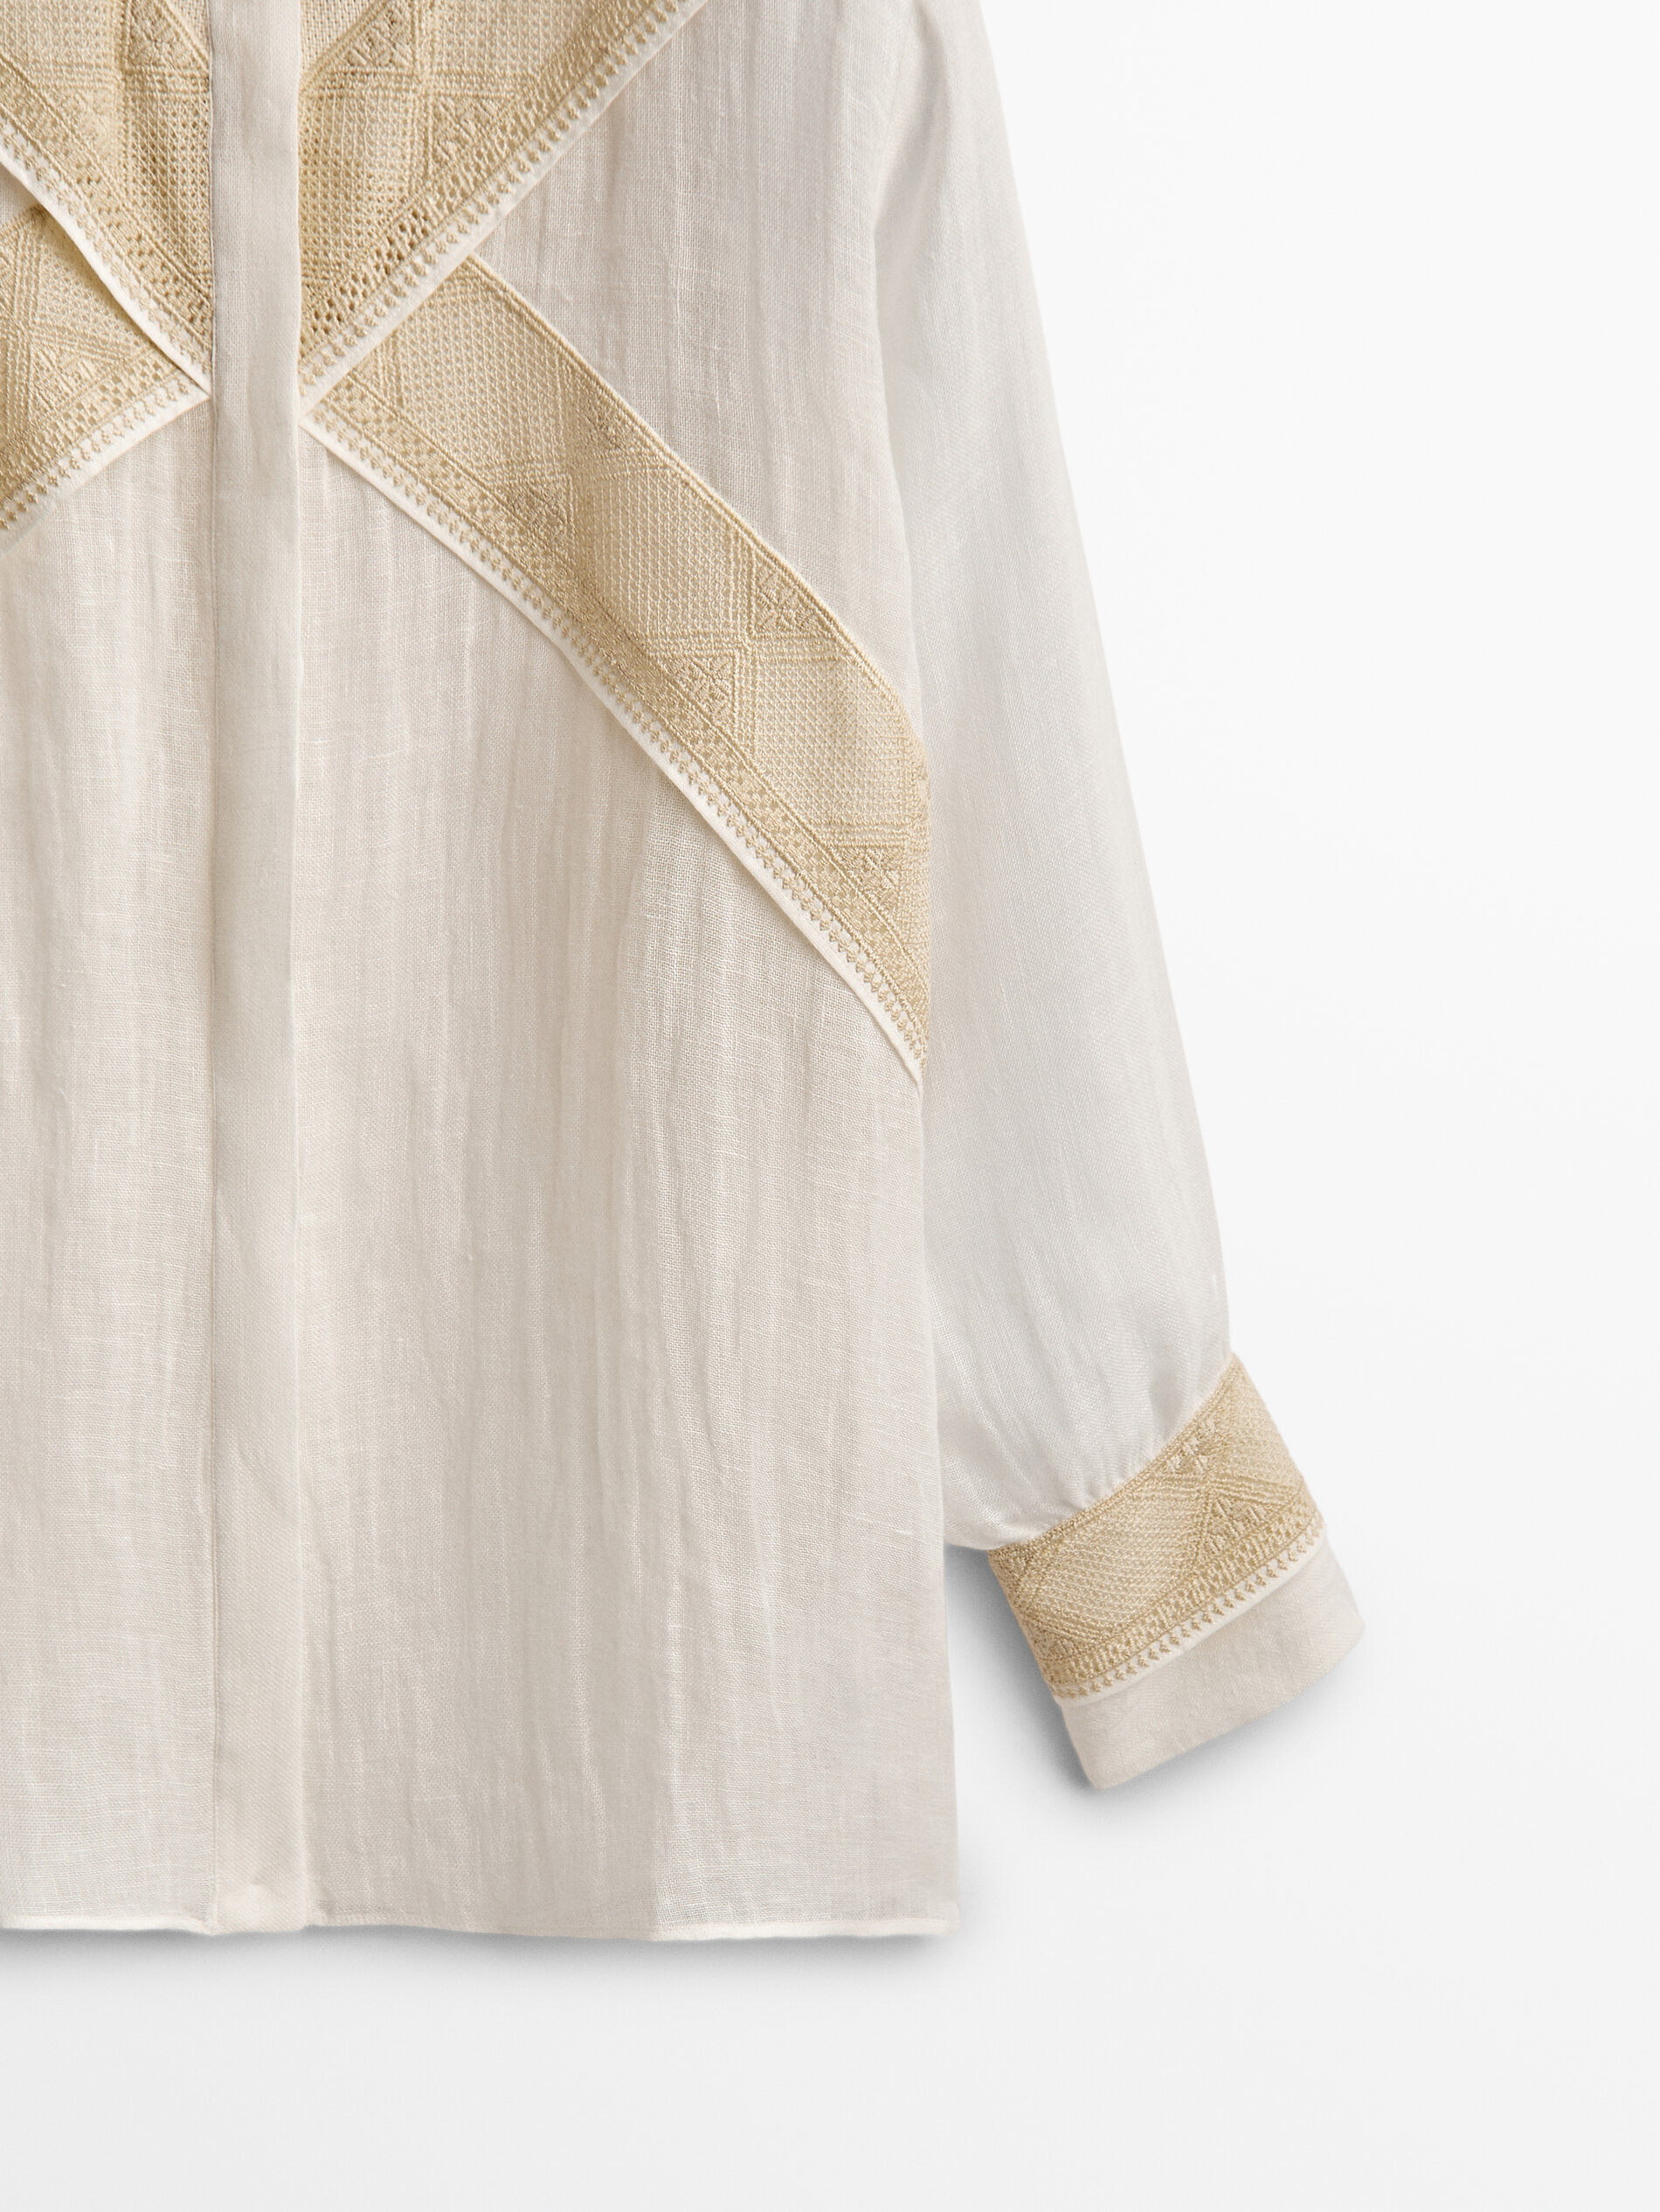 Linen shirt with embroidered detail - Limited Edition